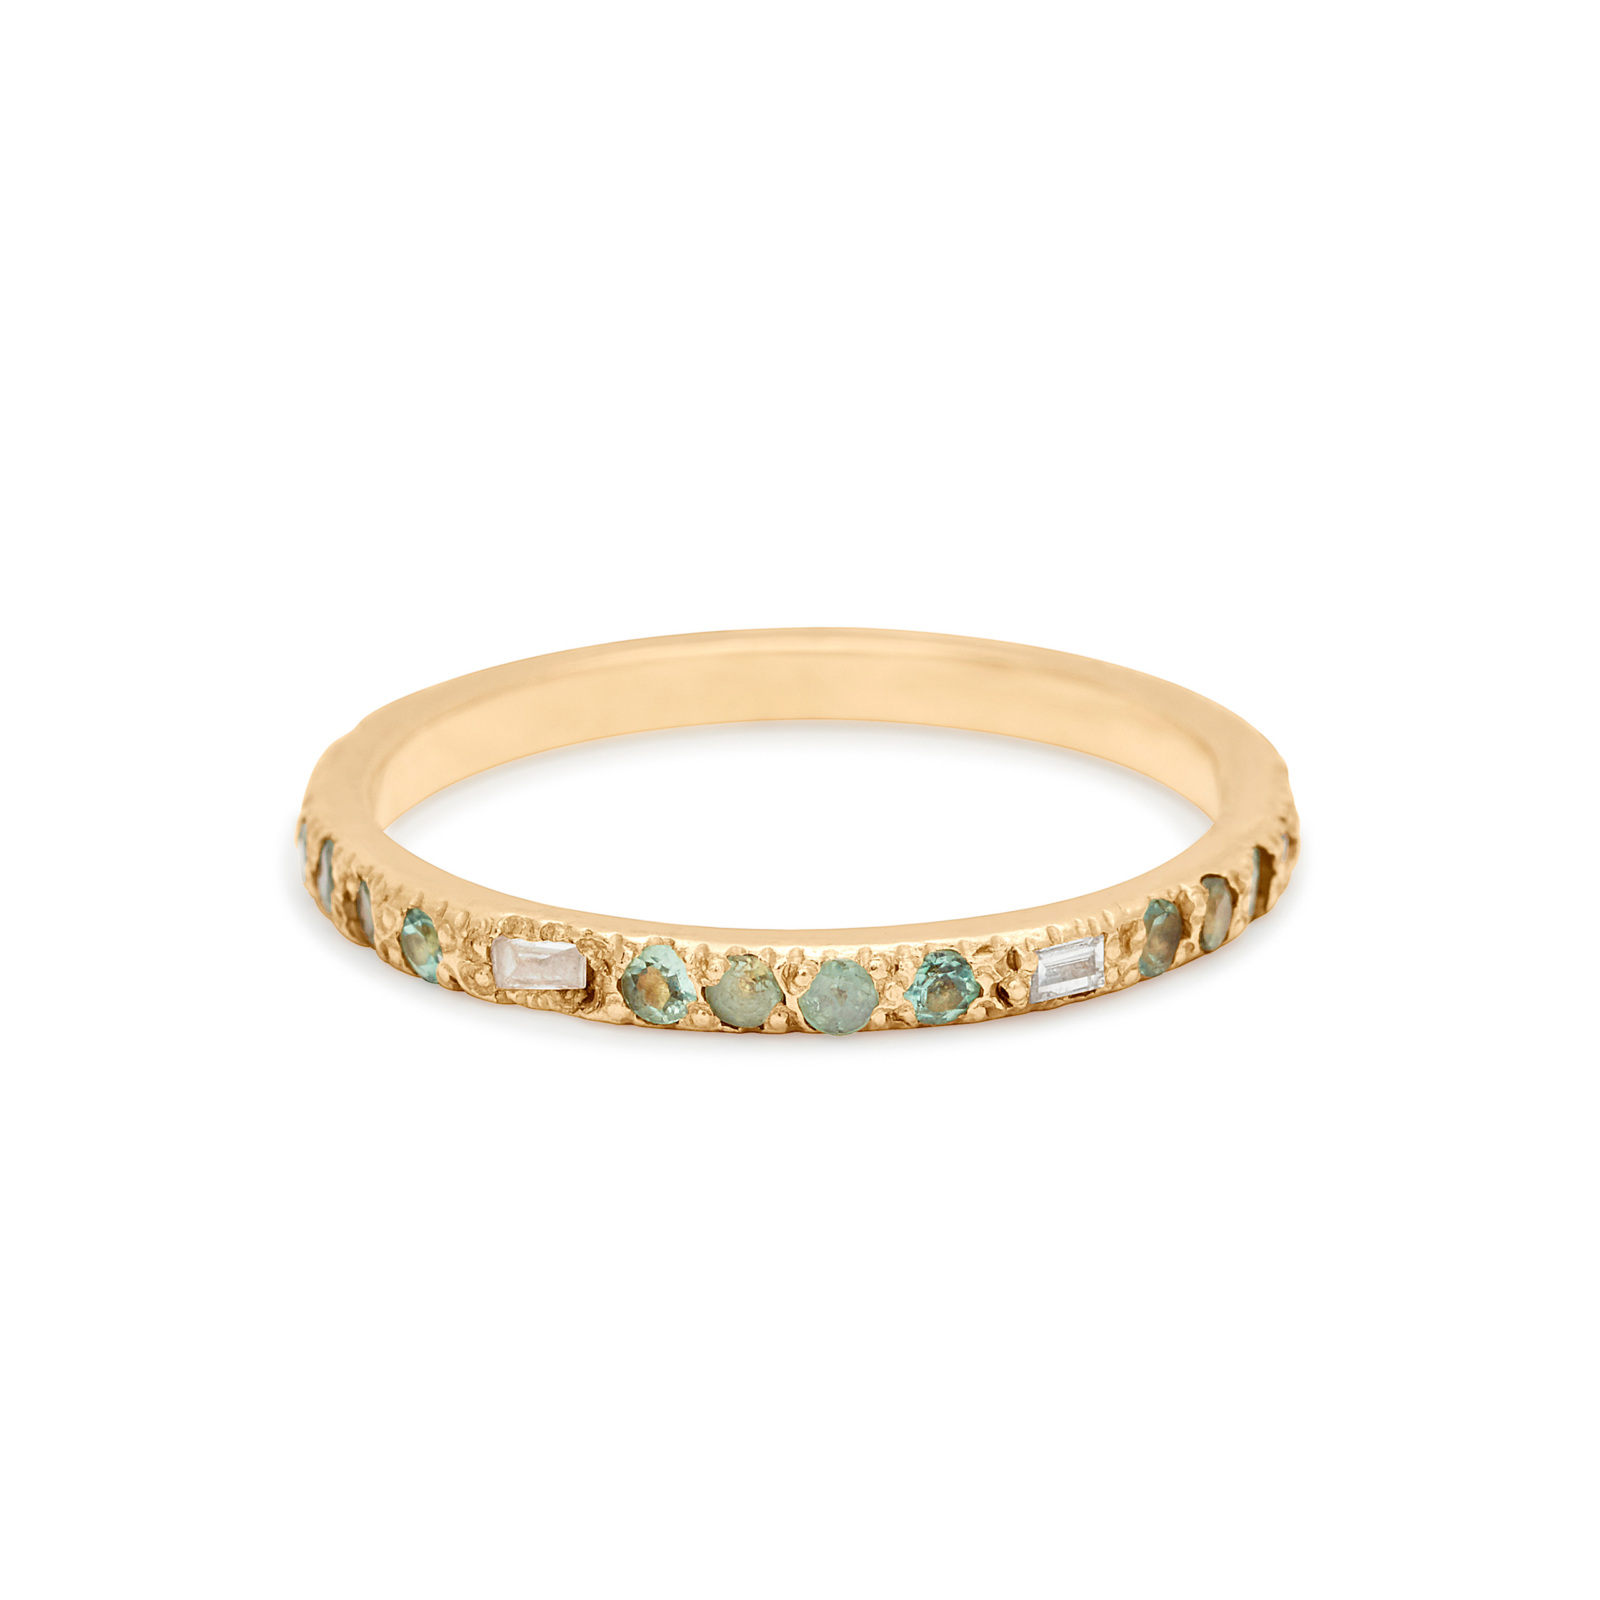 Custom Baguette Band in 18k yellow gold with diamonds and gemstones personalized